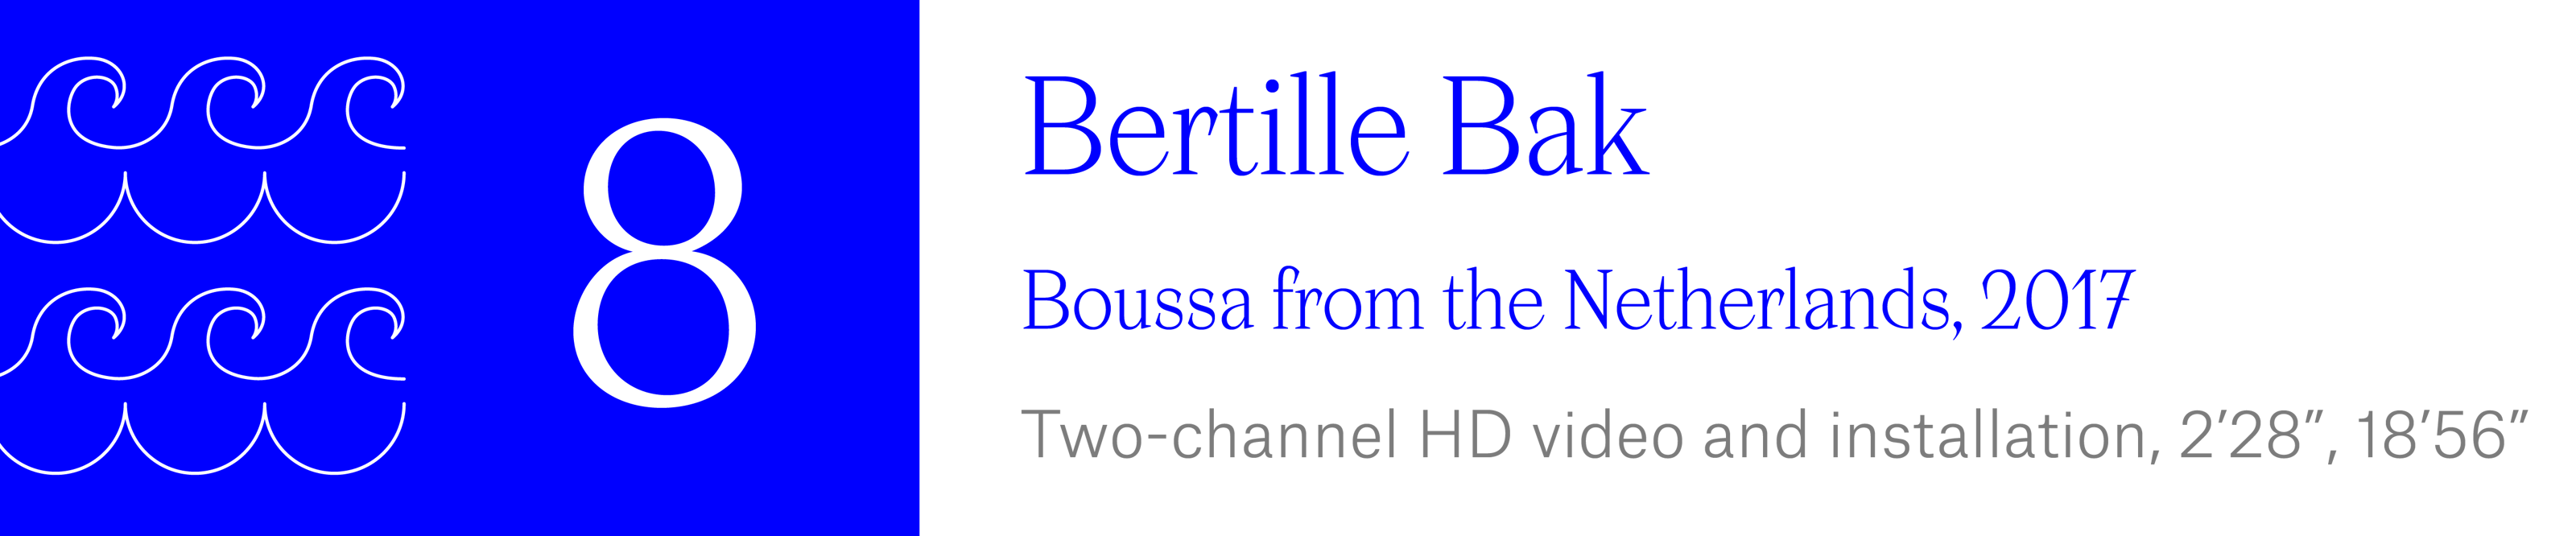 The Wave (8). Bertille Bak - Boussa From the Netherlands, 2017. Two-channel HD video and installation, 2 minutes, 28 seconds and 18 minutes 56 seconds.